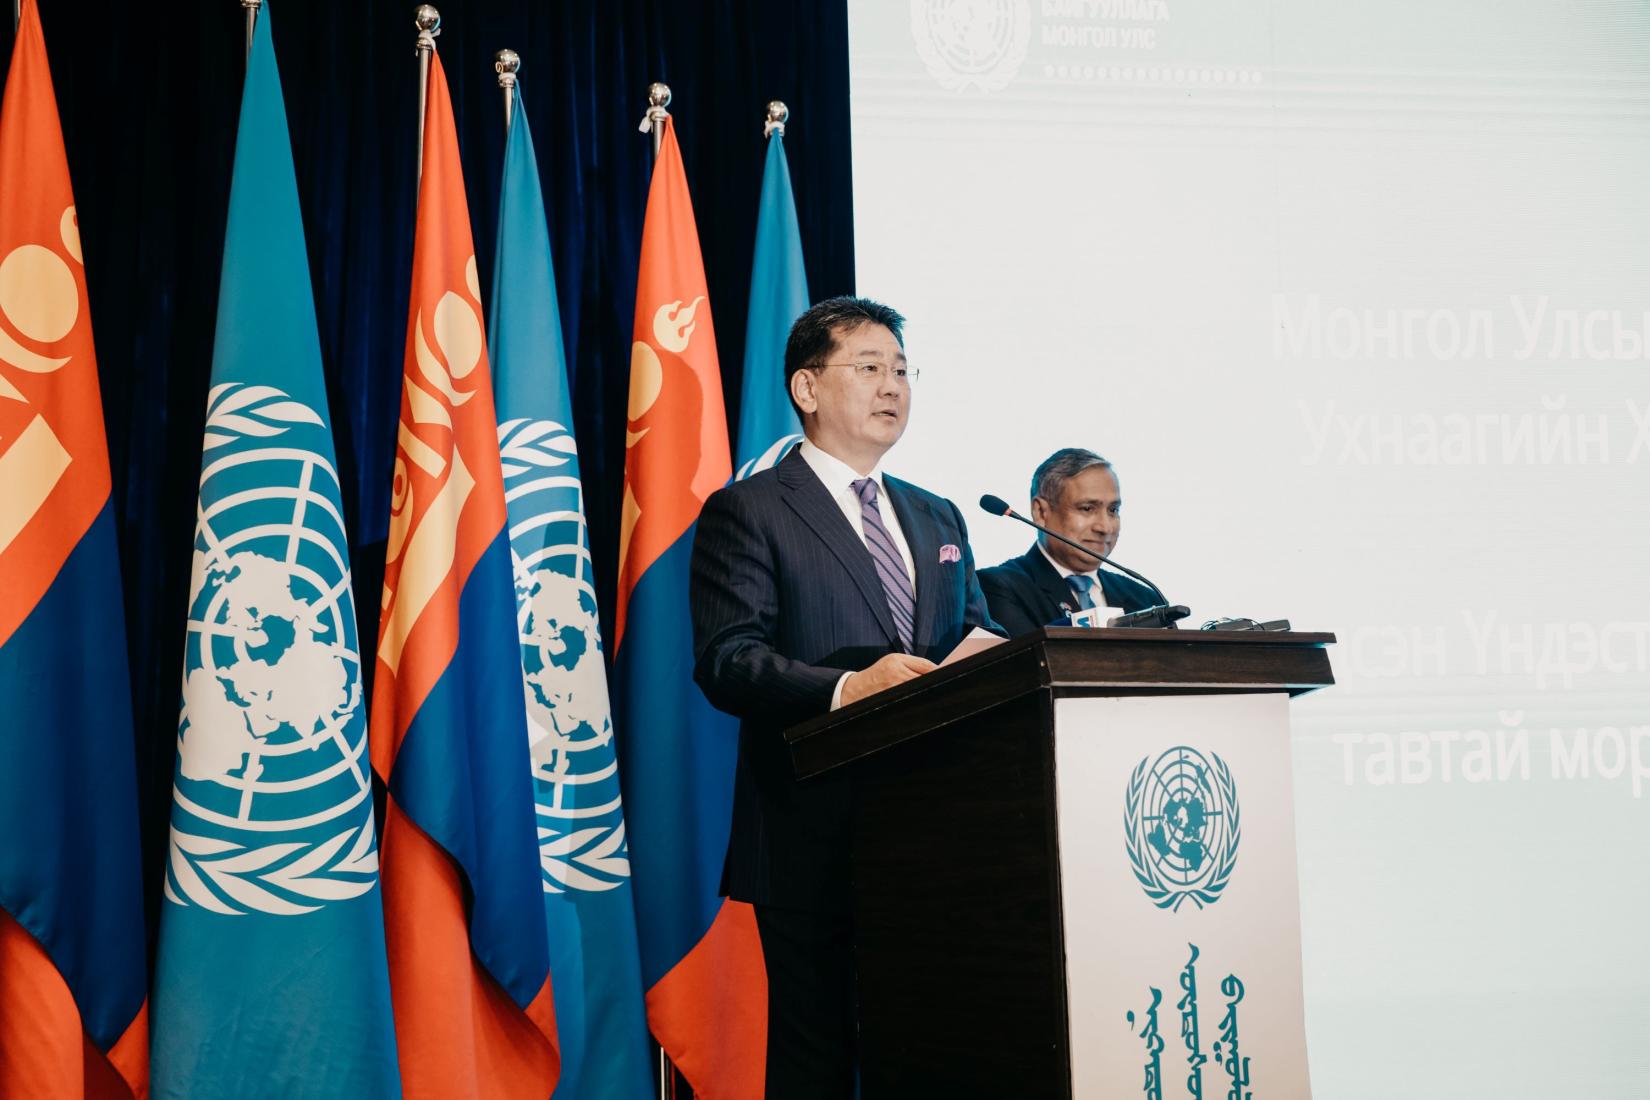 President addresses to the UN staff